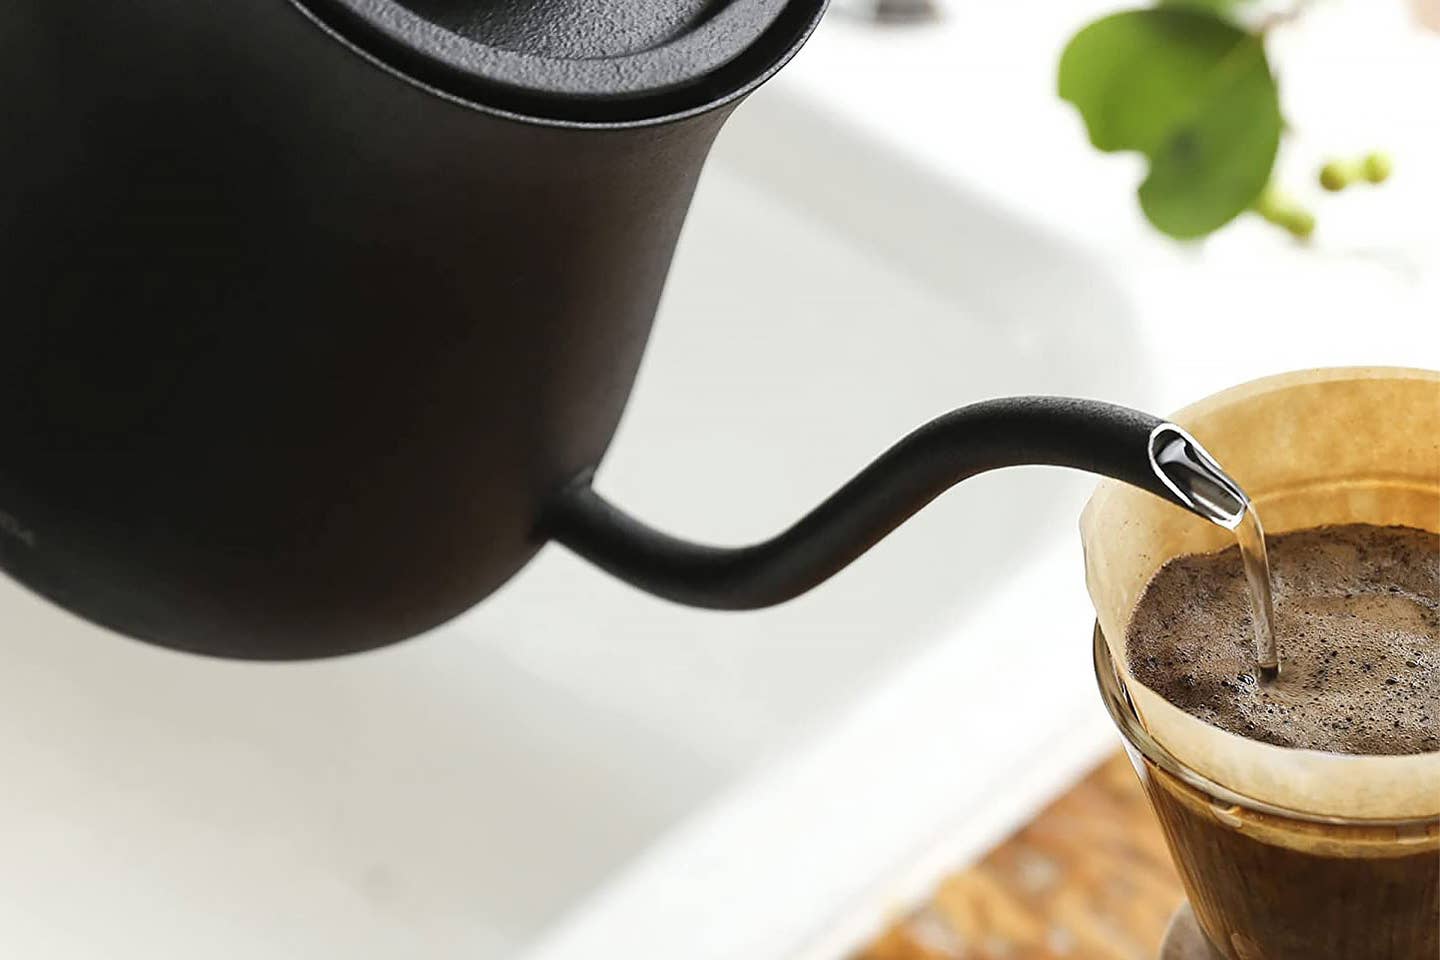 The Best Gooseneck Kettles Add Form and Function to Your Coffee Routine